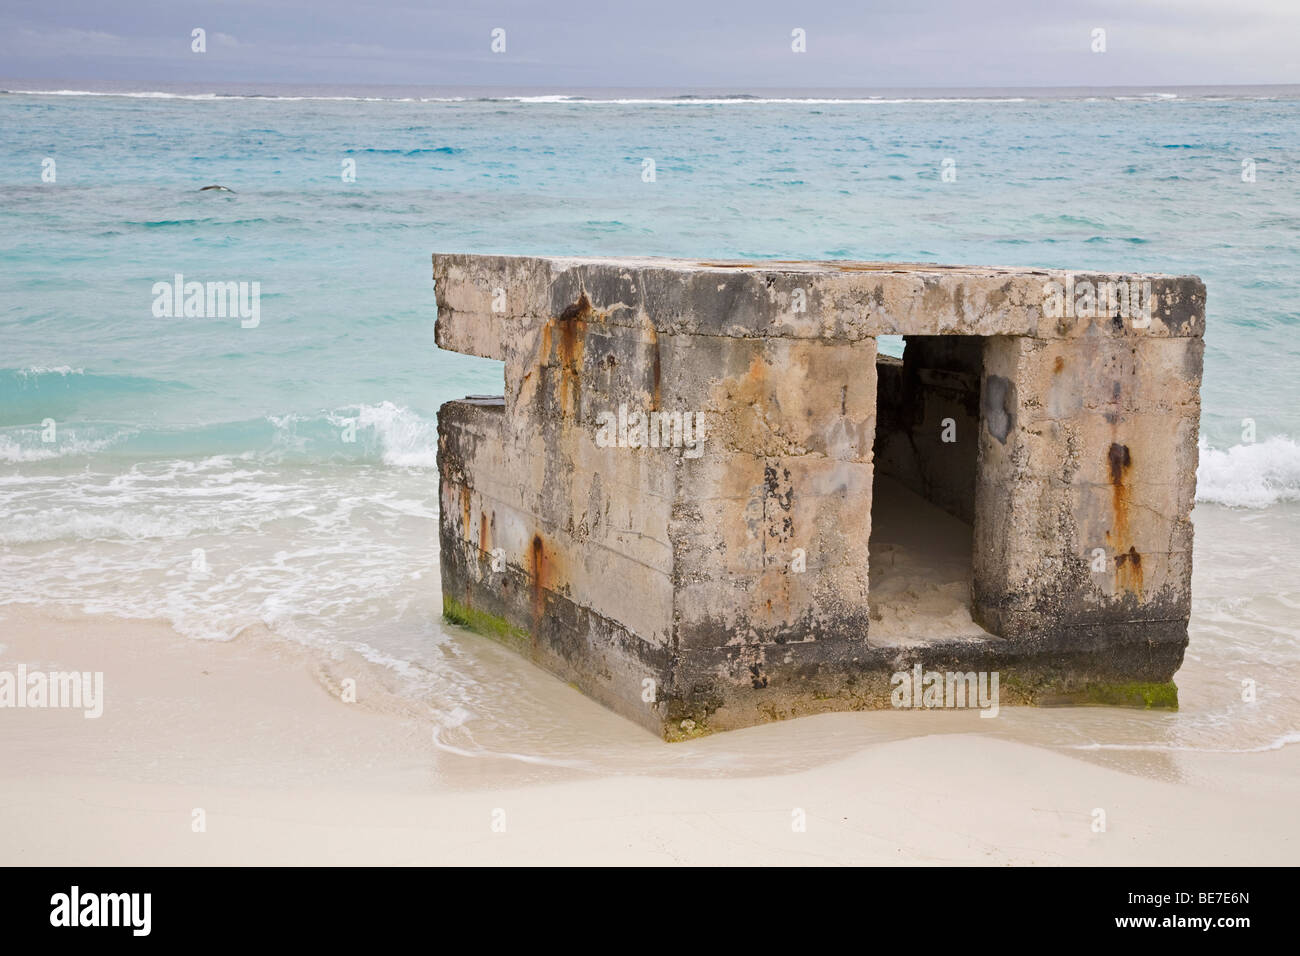 Pillbox used as a military lookout during World War II on the beach of Midway Atoll, part of the Battle of Midway National Memorial Stock Photo